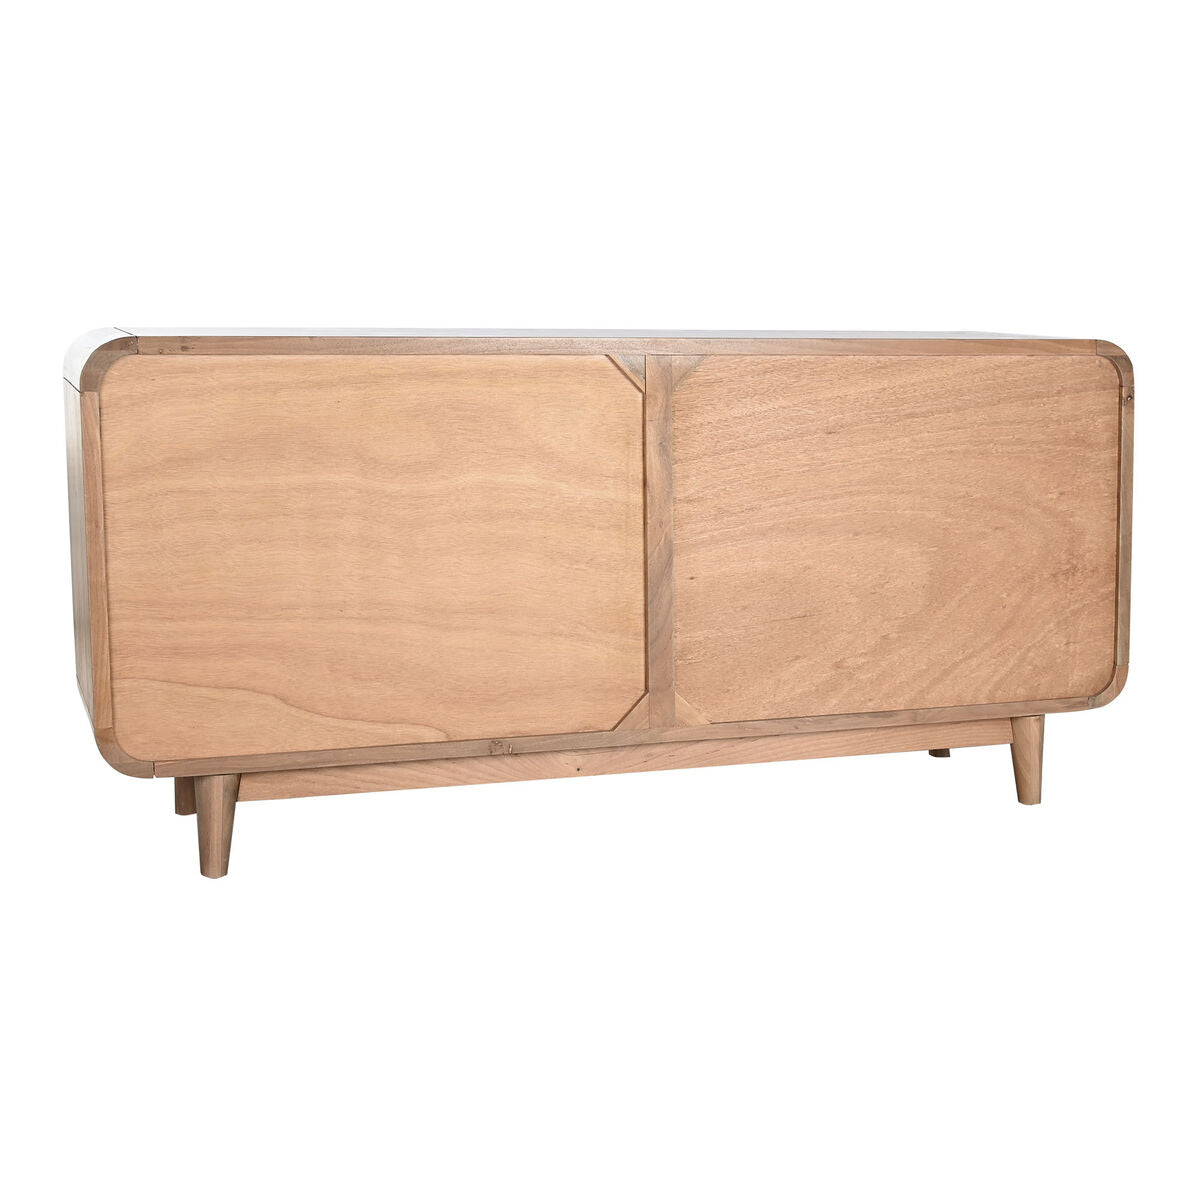 Sideboard in Wood with Rattan Finish (160 x 38 x 75 cm)